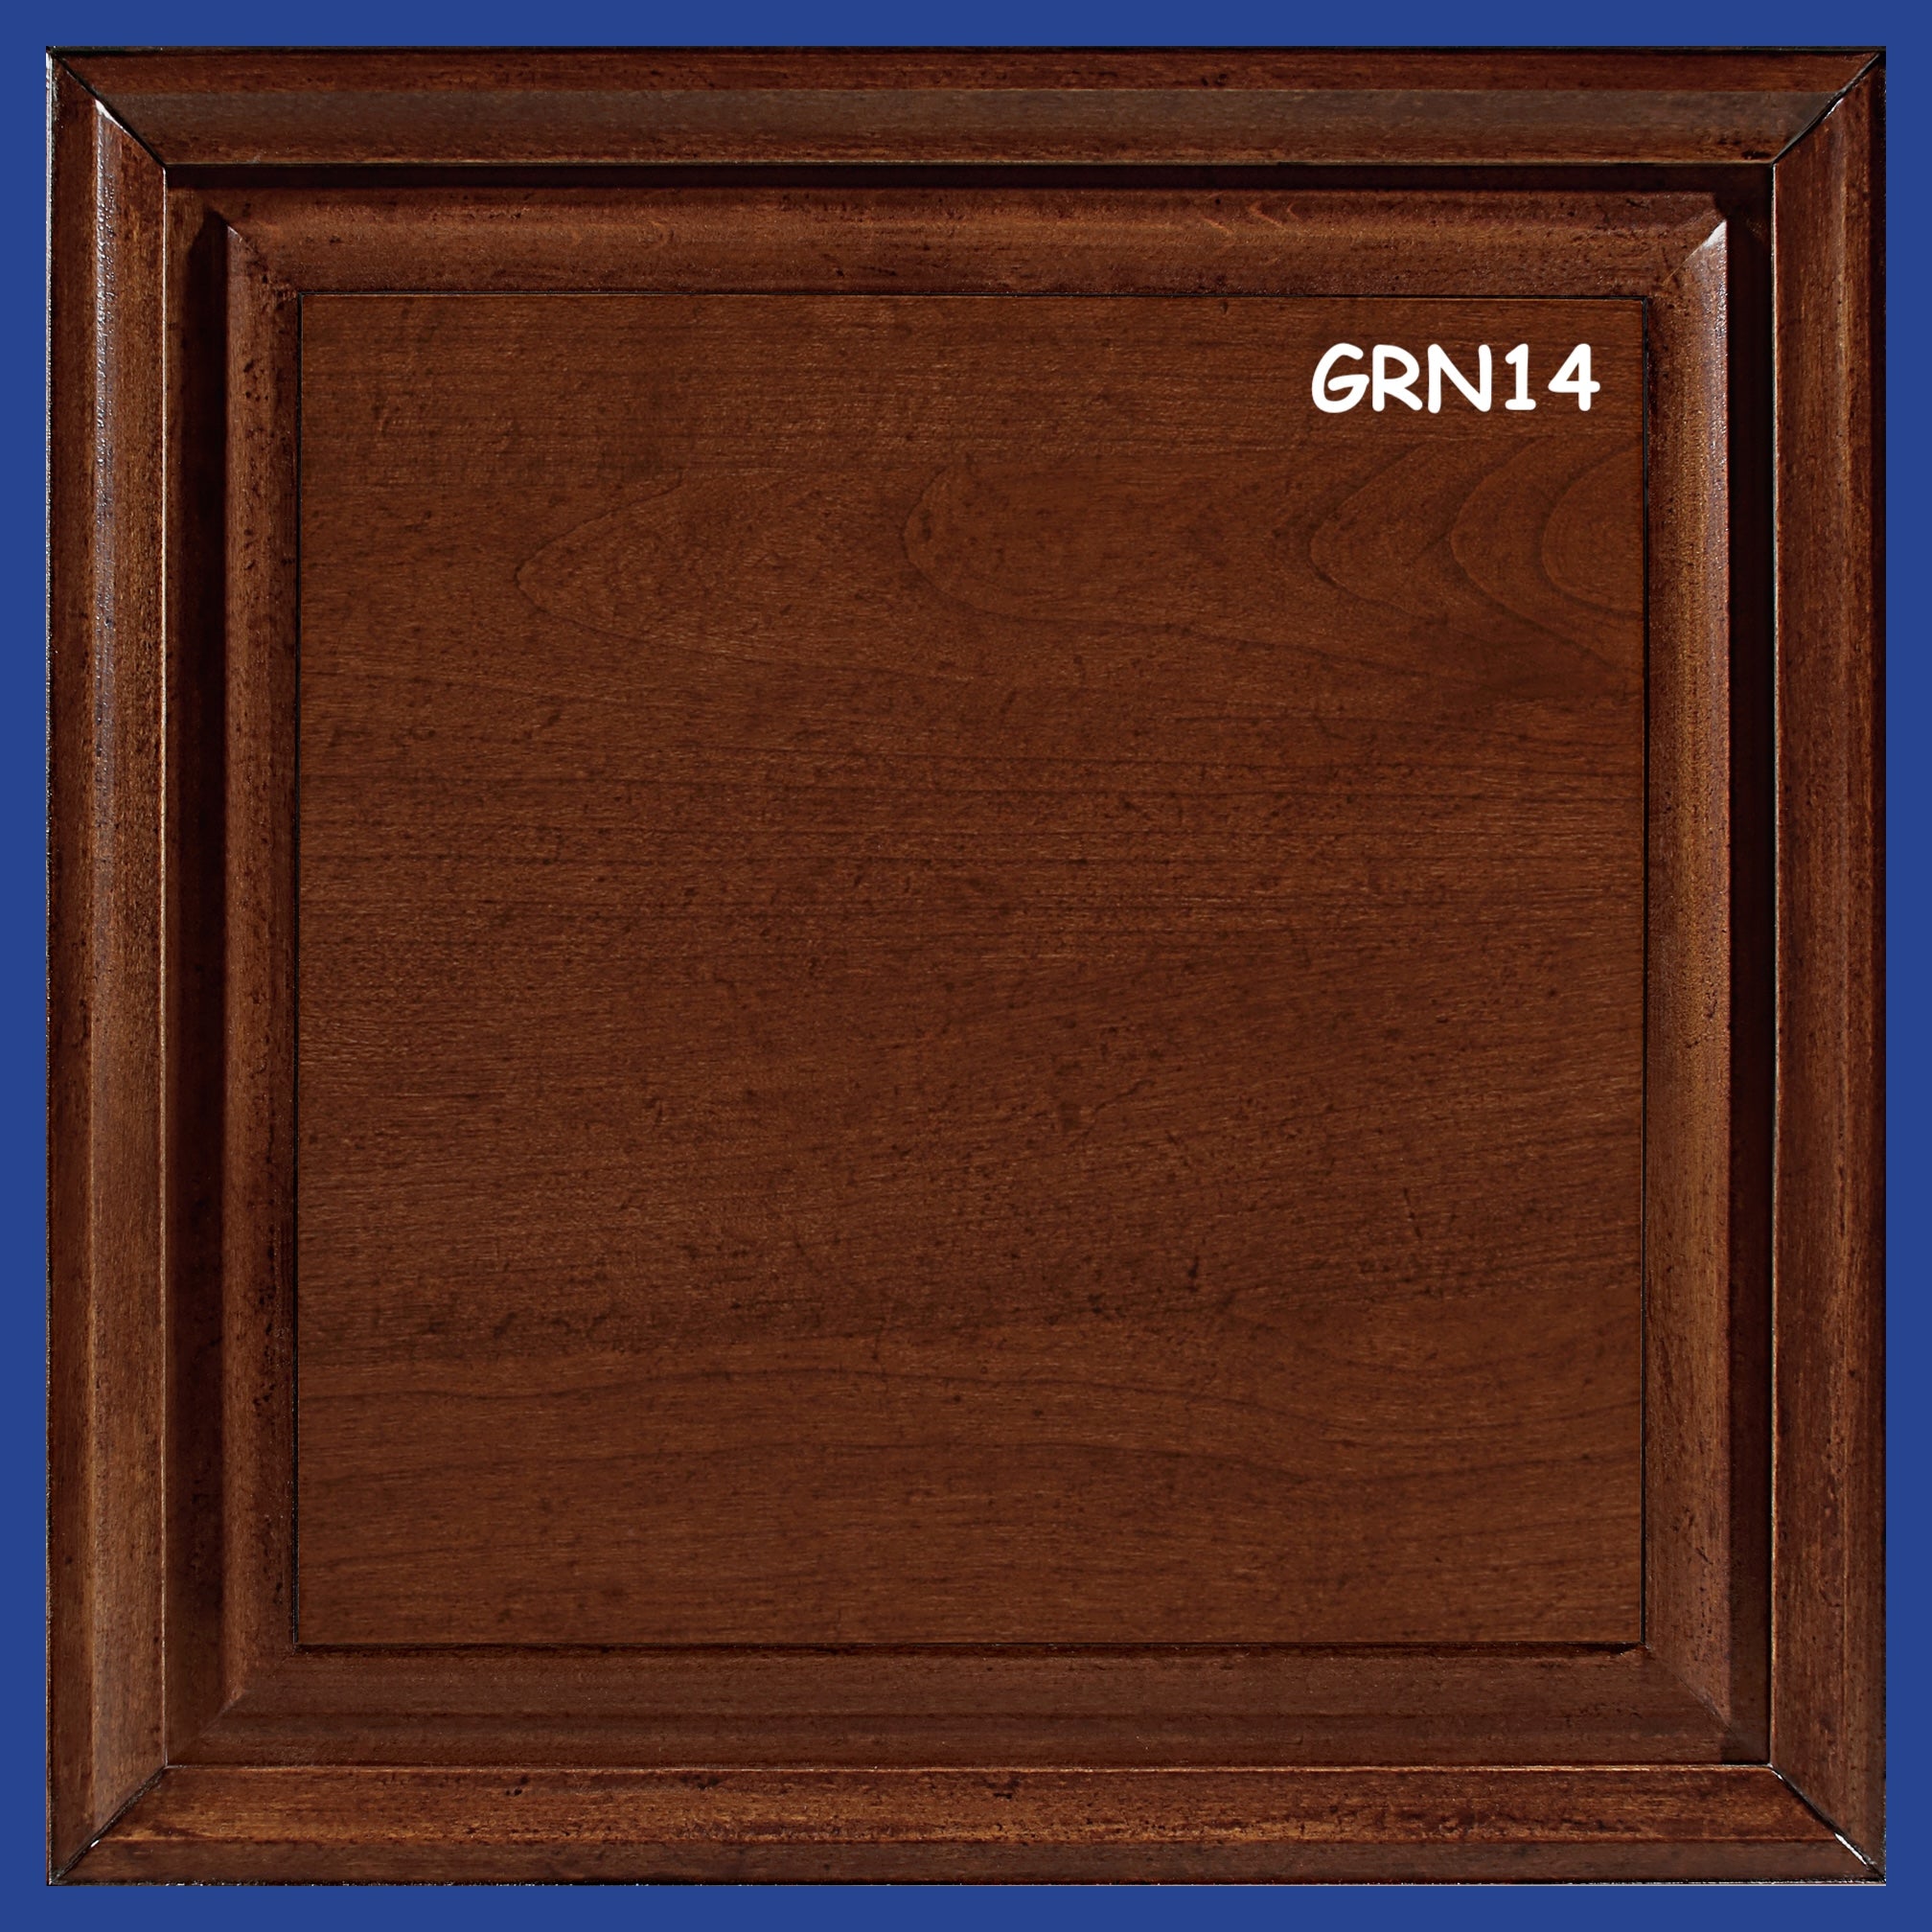 Classic showcase L 180 in cherry wood finish with decoration from the Arte D'Este Piombini collection